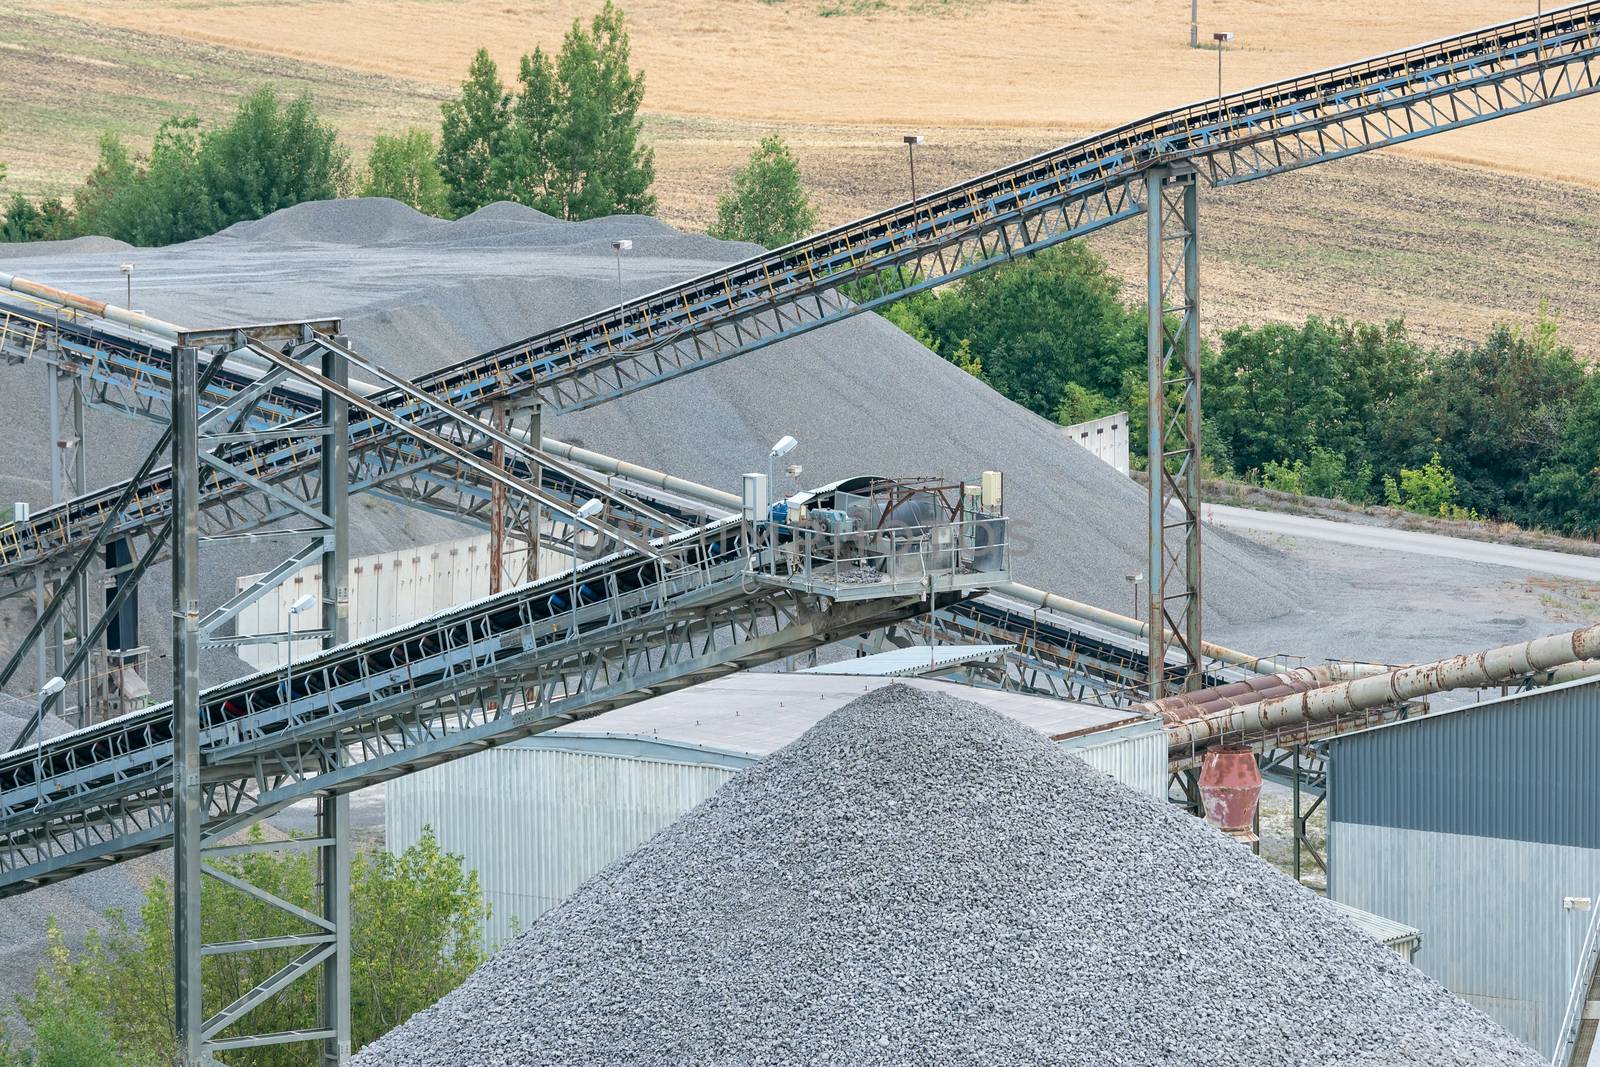 Belt conveyors and mining equipment in a quarry. Stone quarry wi by xtrekx